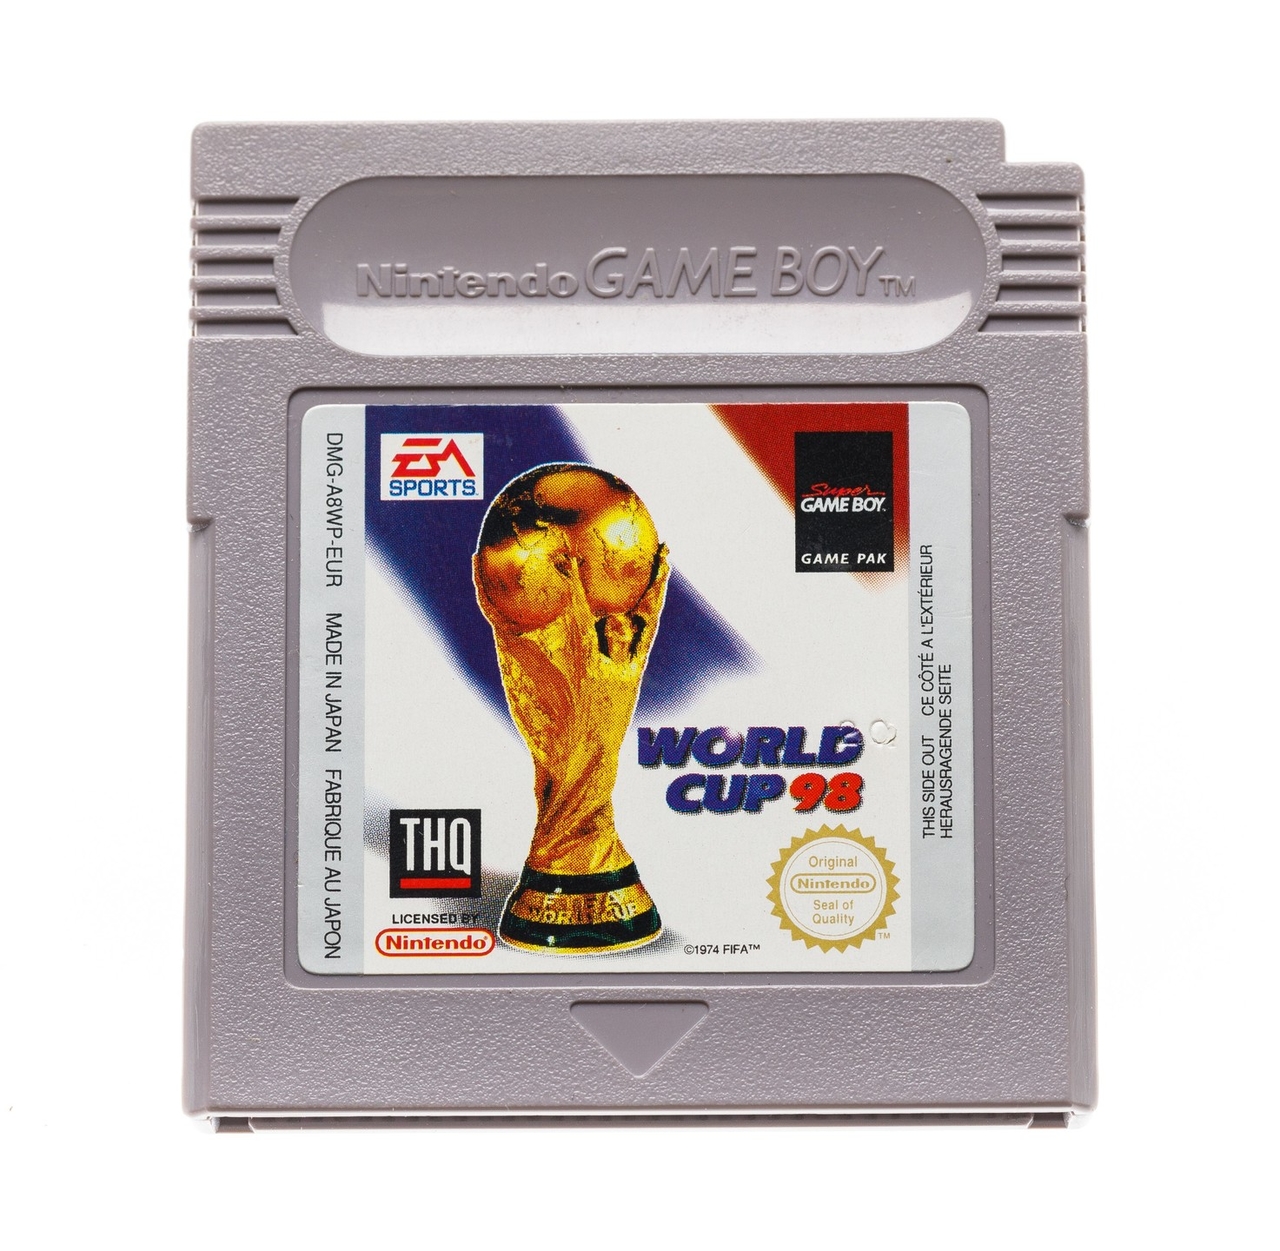 World Cup 98 - Gameboy Classic Games